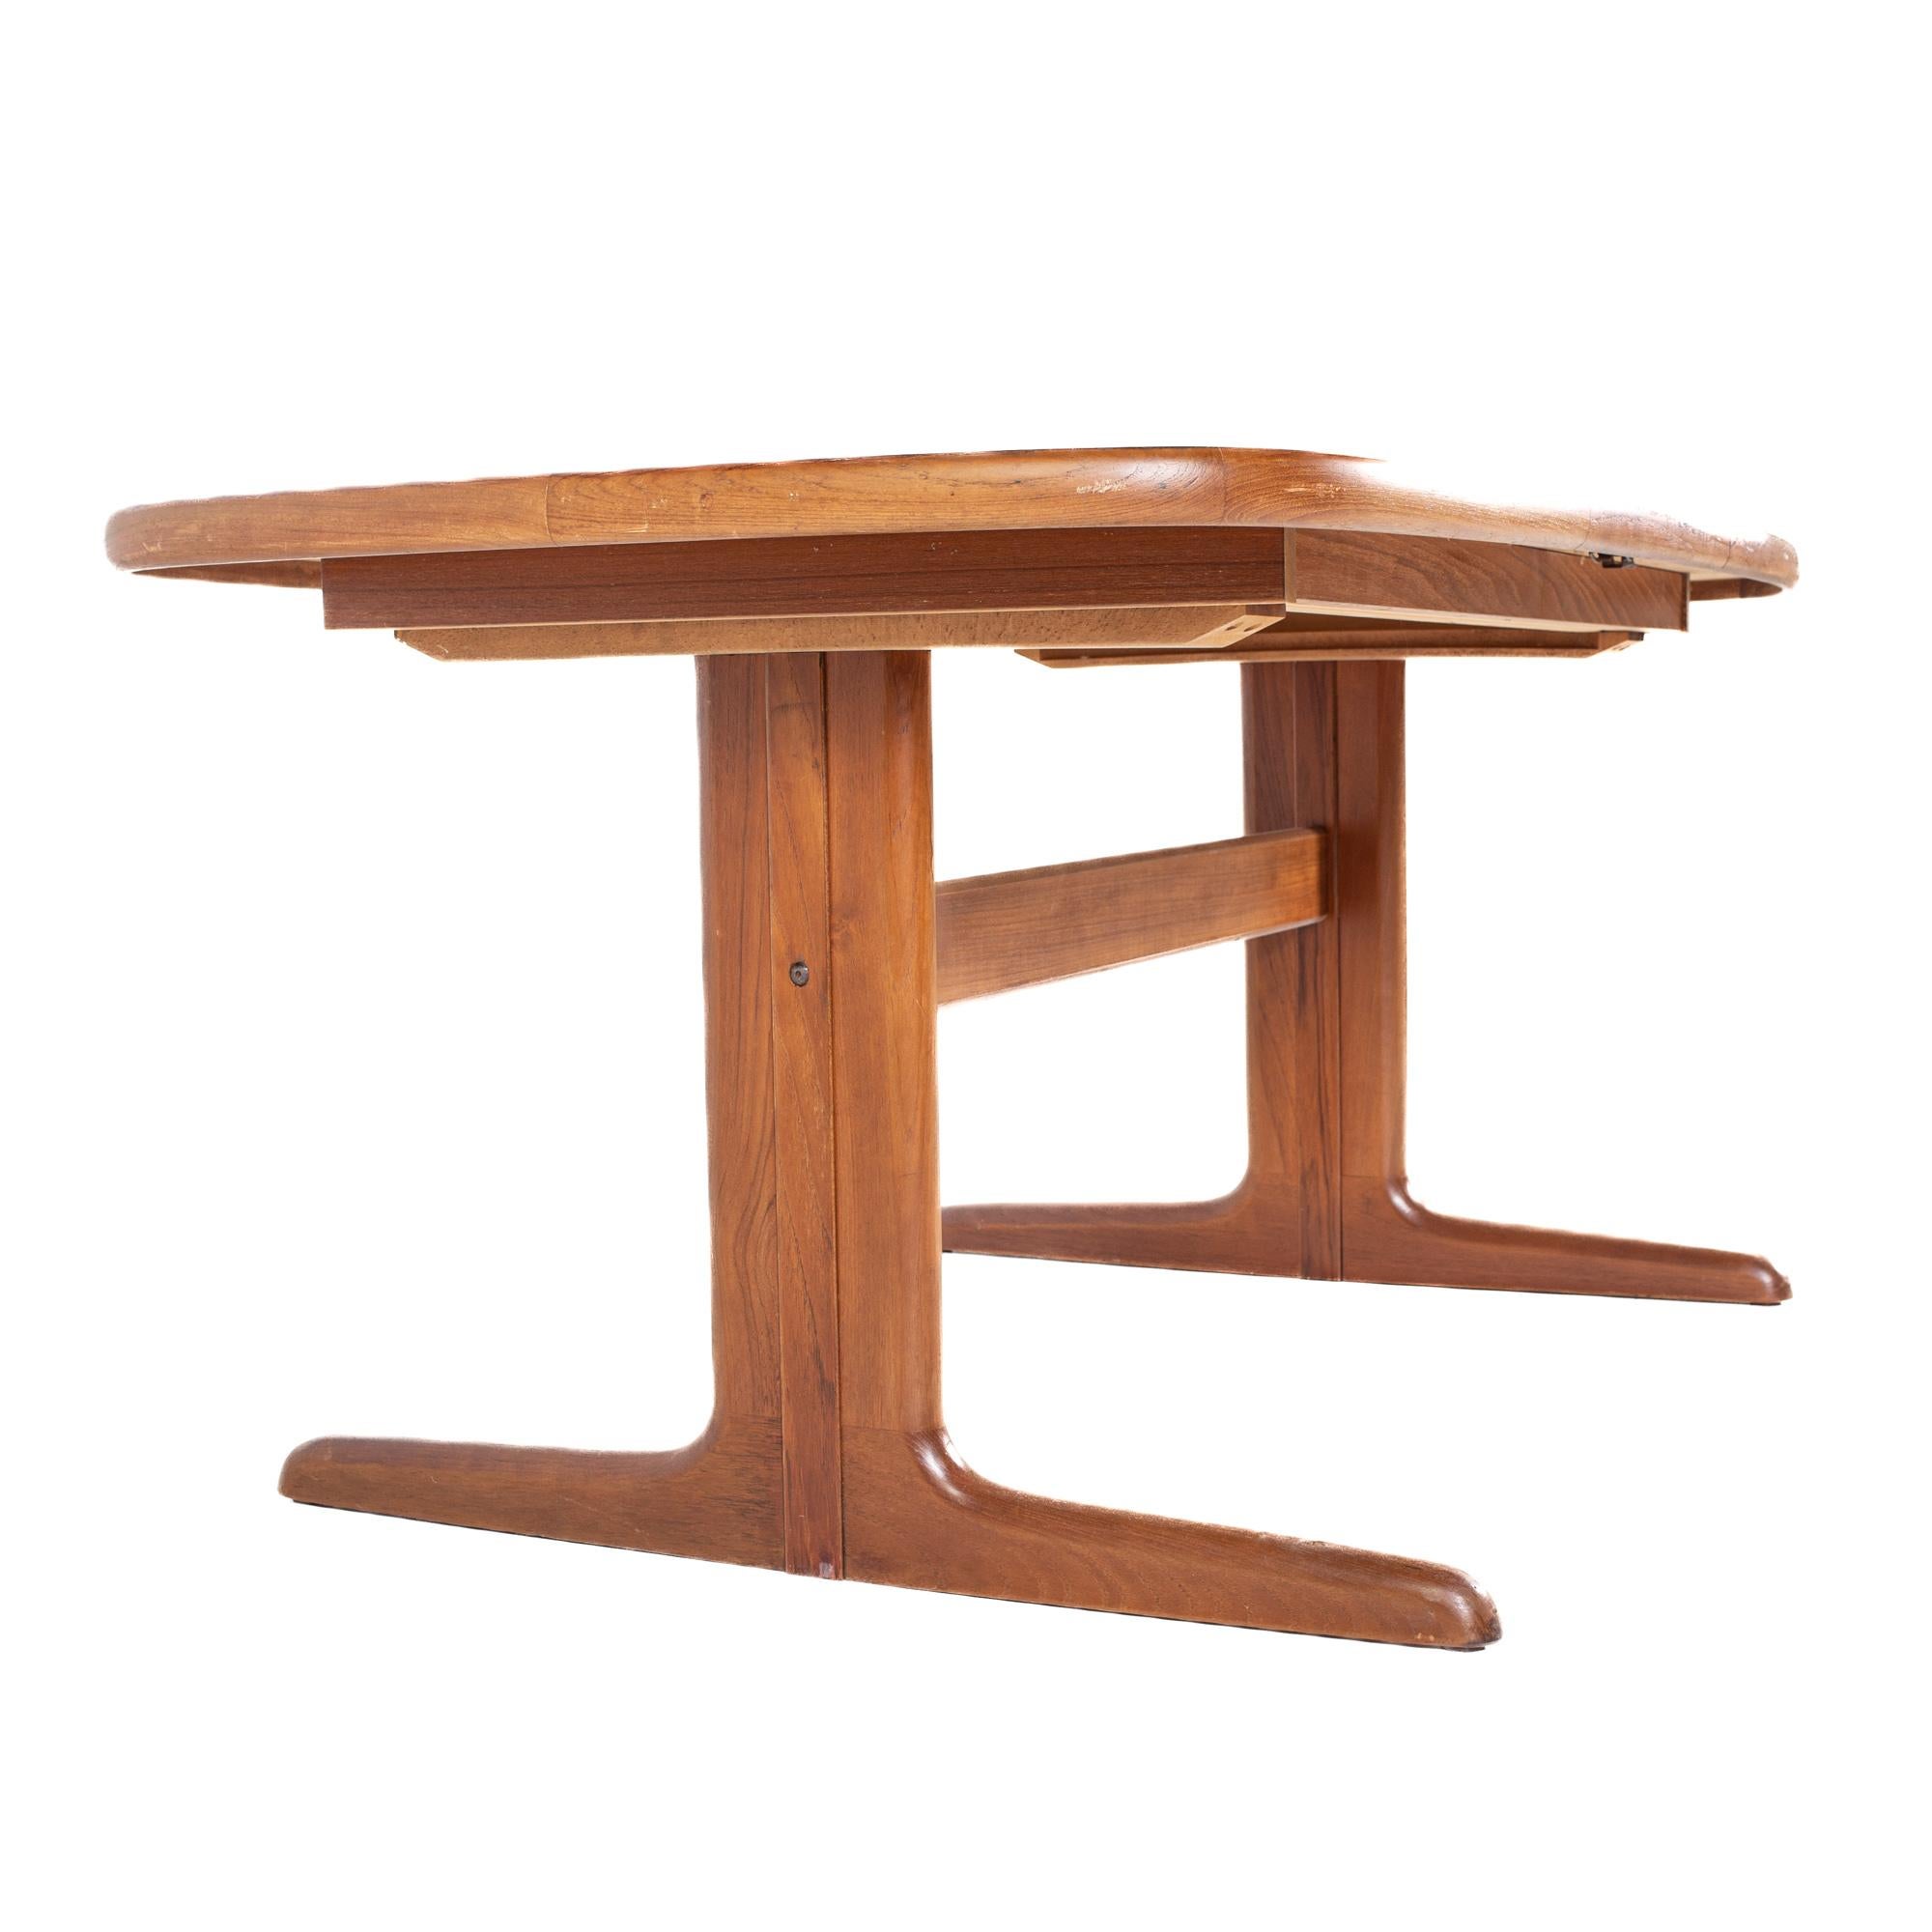 Dyrlund Style Mid Century Teak Dining Table In Good Condition For Sale In Countryside, IL